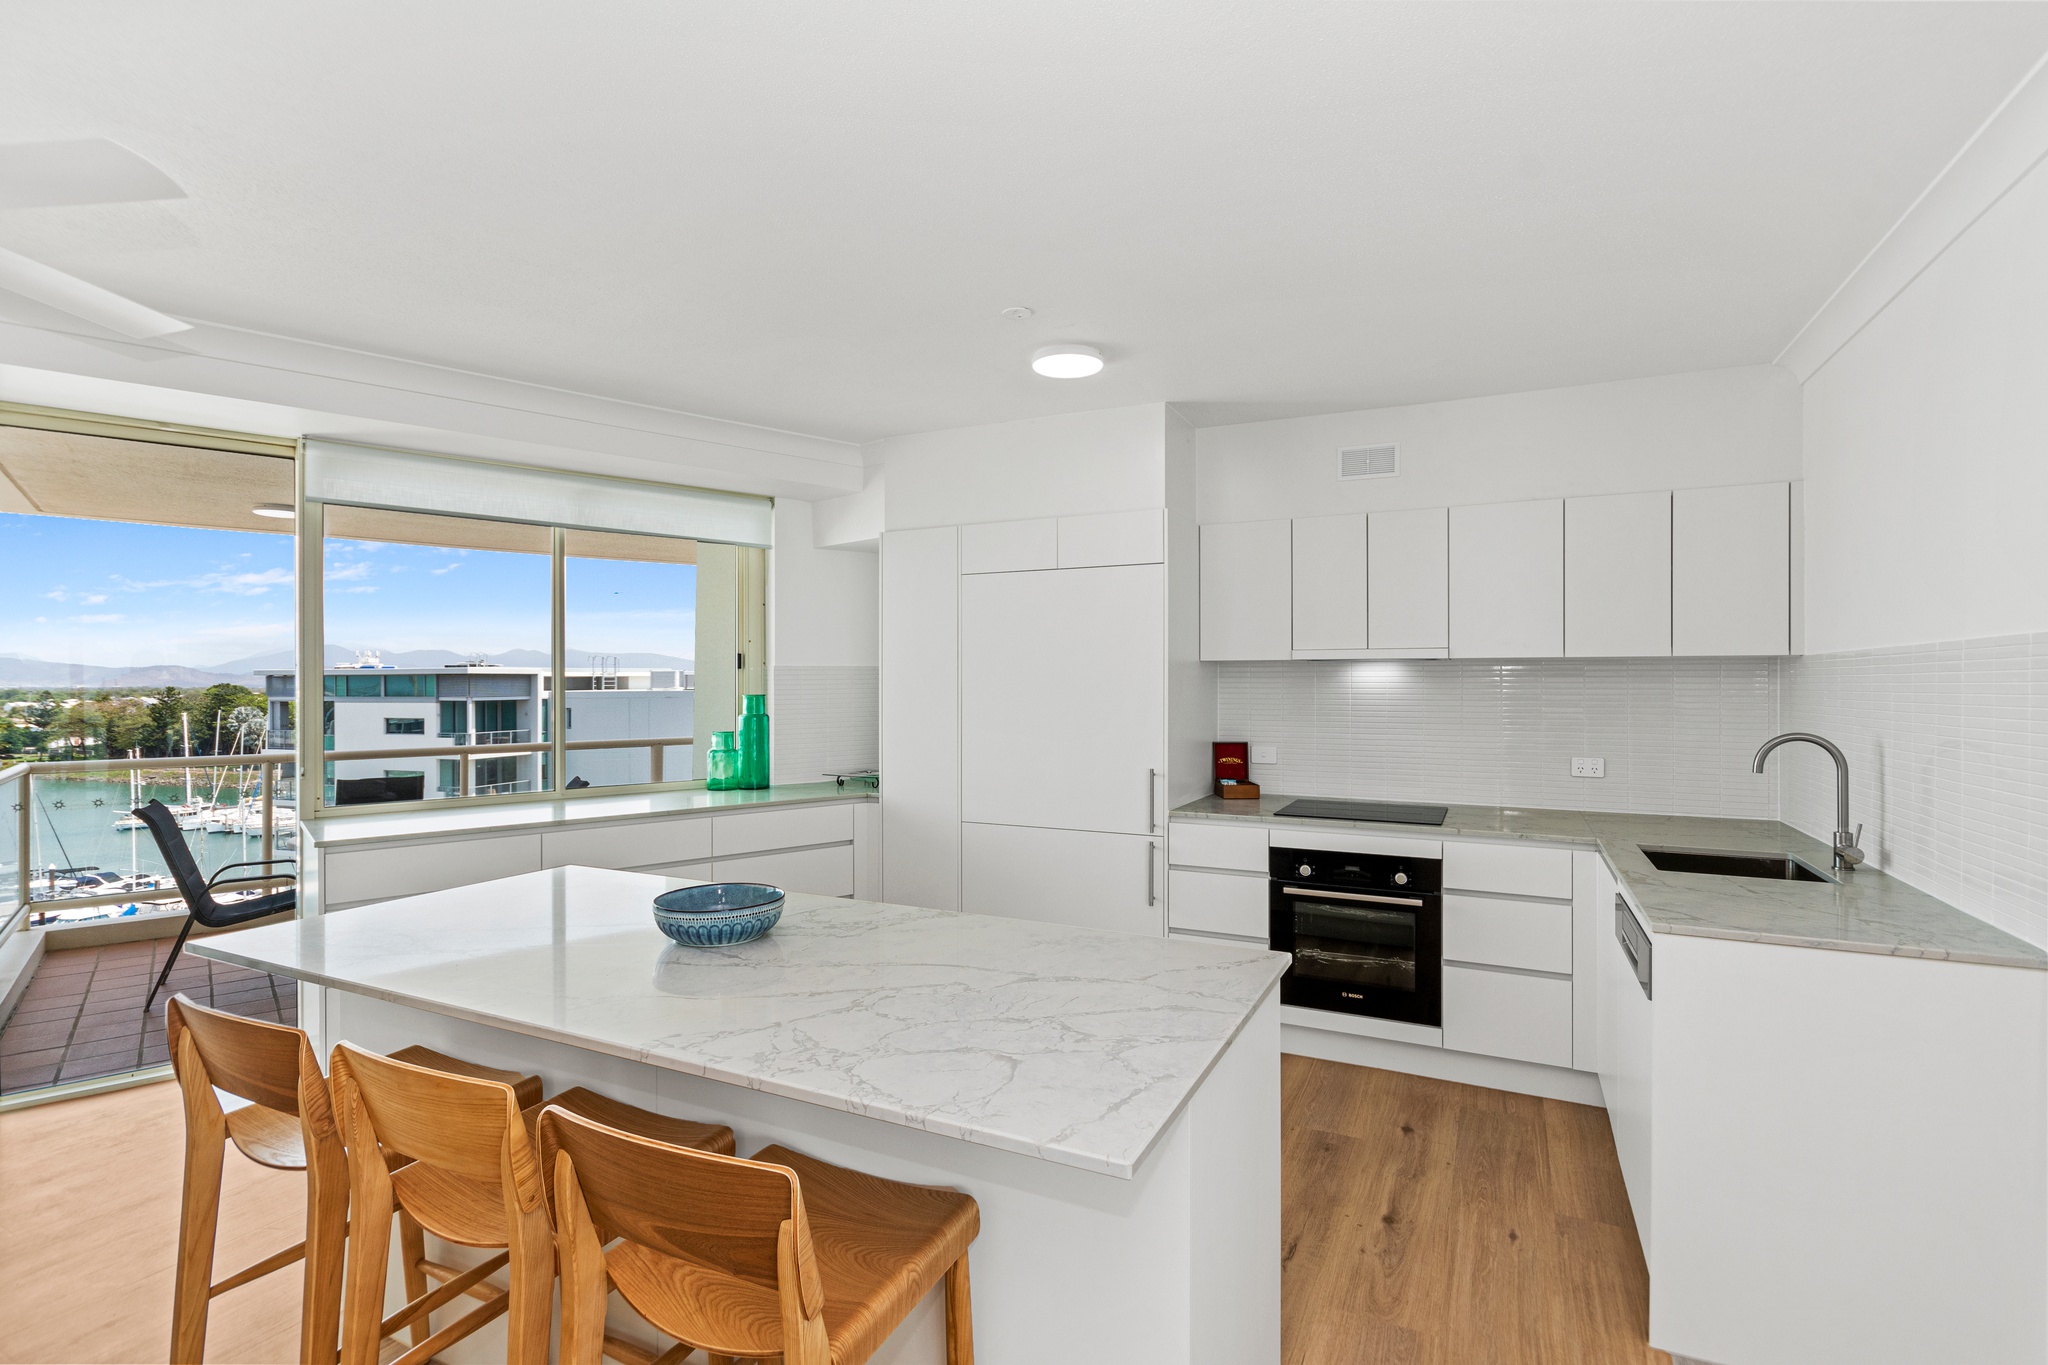 3 Bedroom Accommodation Townsville with kitchen